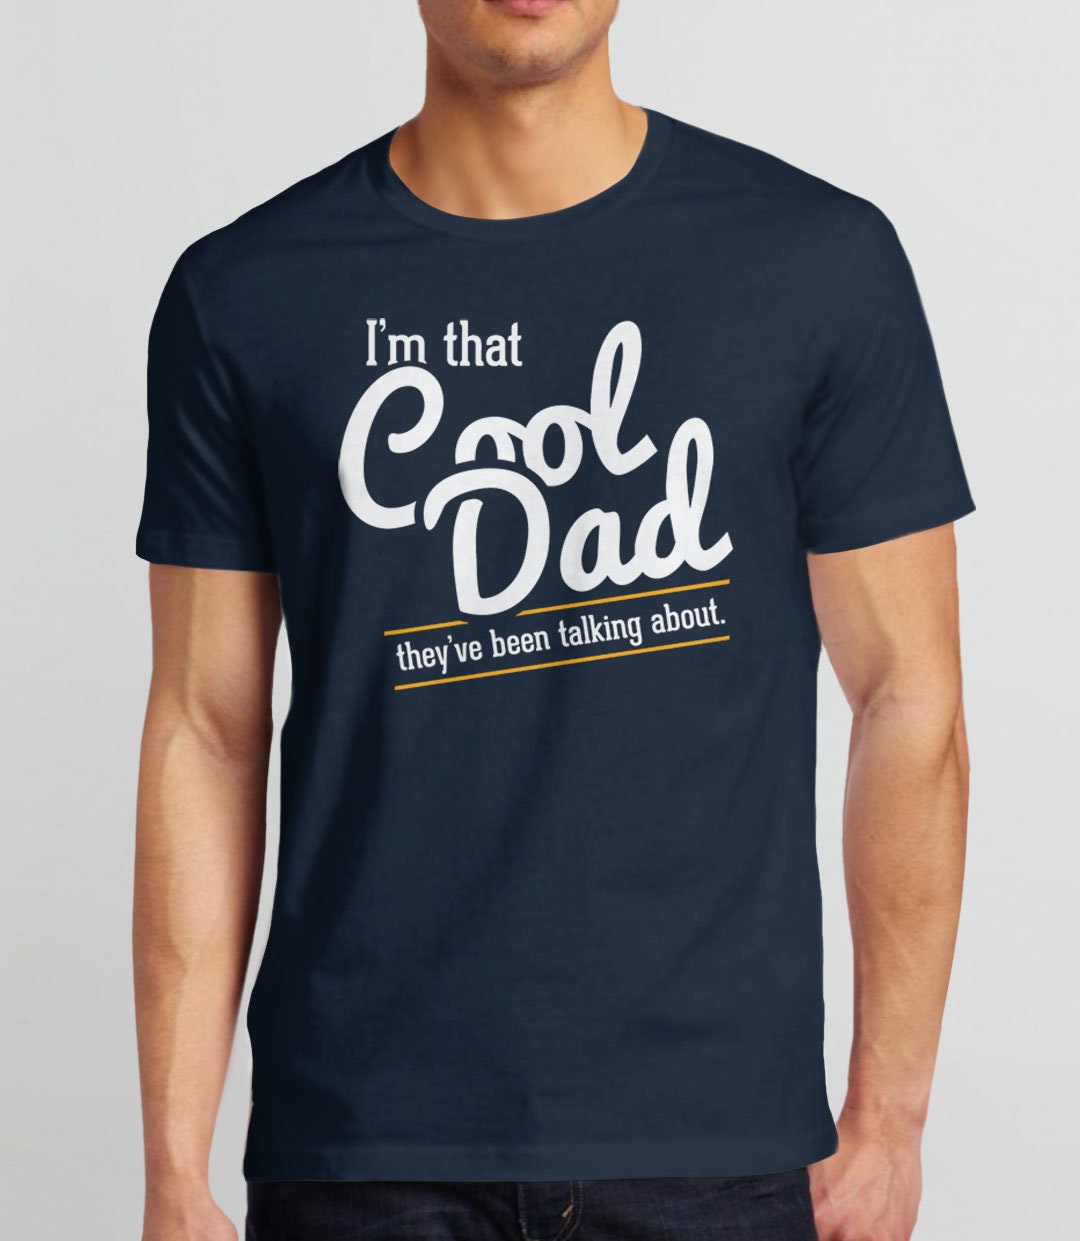 Cool Dad Shirt, Funny Dad T Shirt, Fathers Day Shirt for Men, Gift Idea for  Him, New Dad Tshirt, Dad to Be Tee Shirt, Daddy T-shirt Dad Gift 